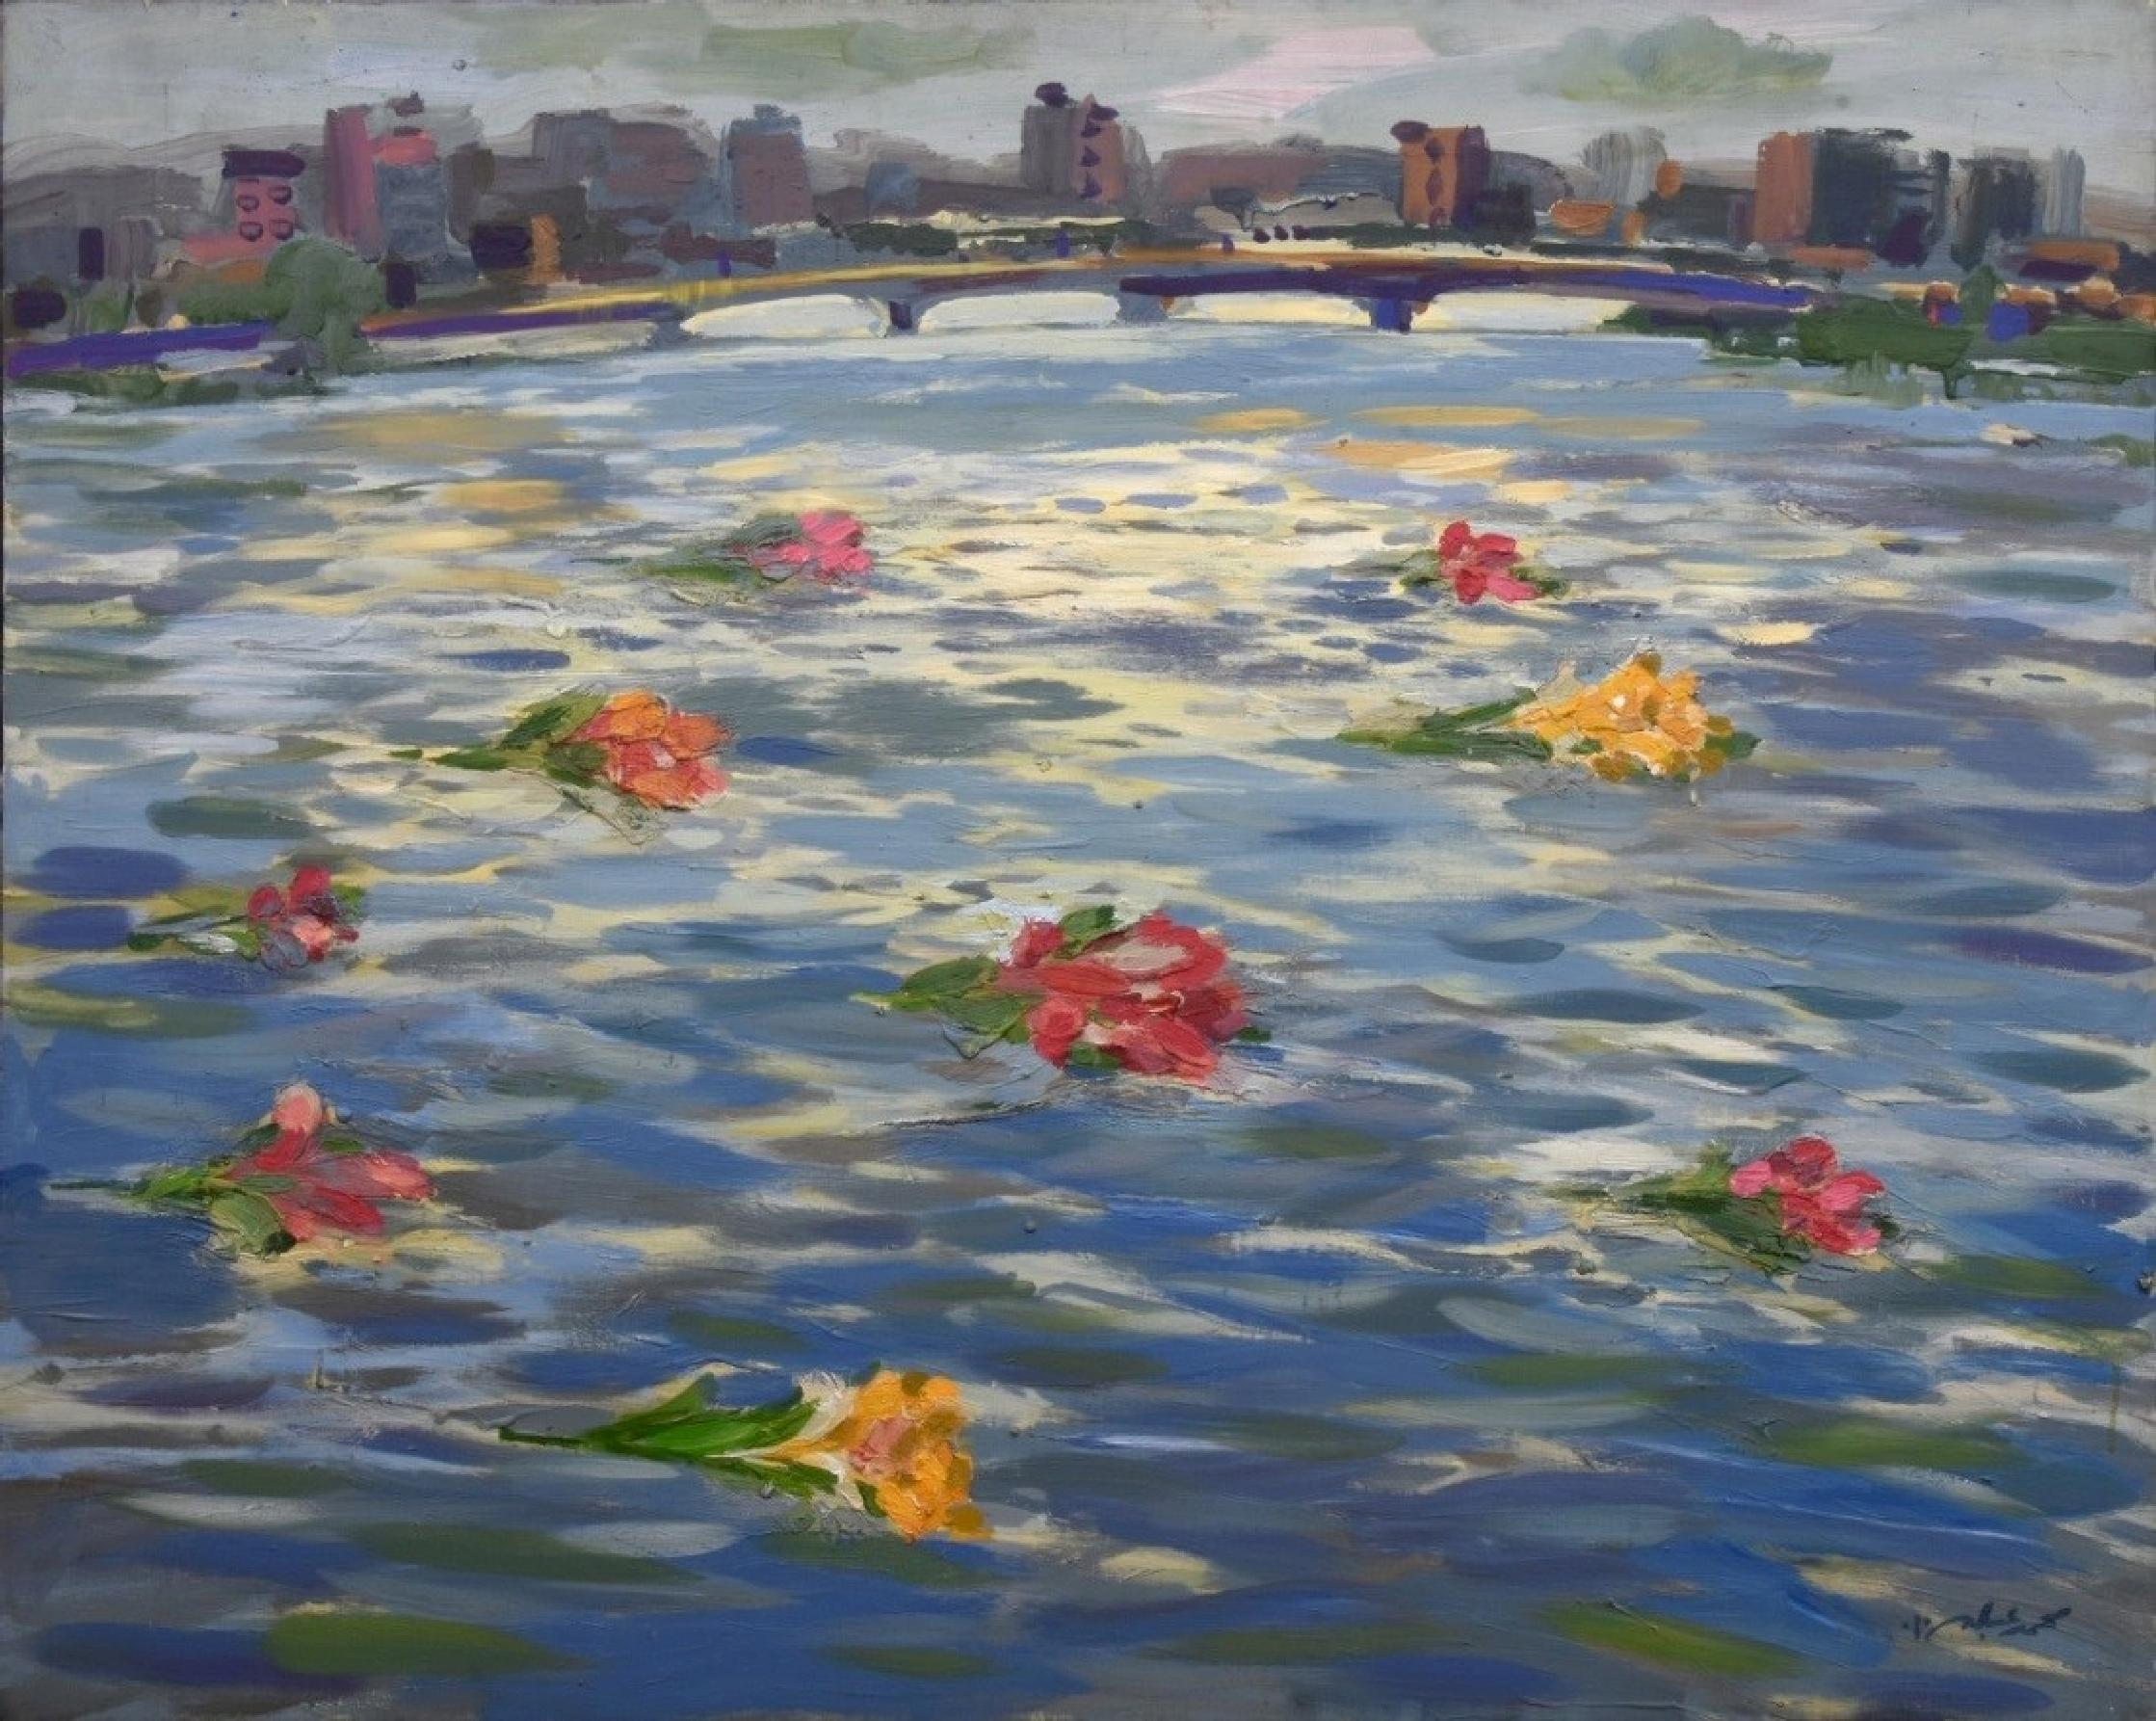 "Roses on the Nile III" Painting 47" x 59" inch by Mohamed Abla